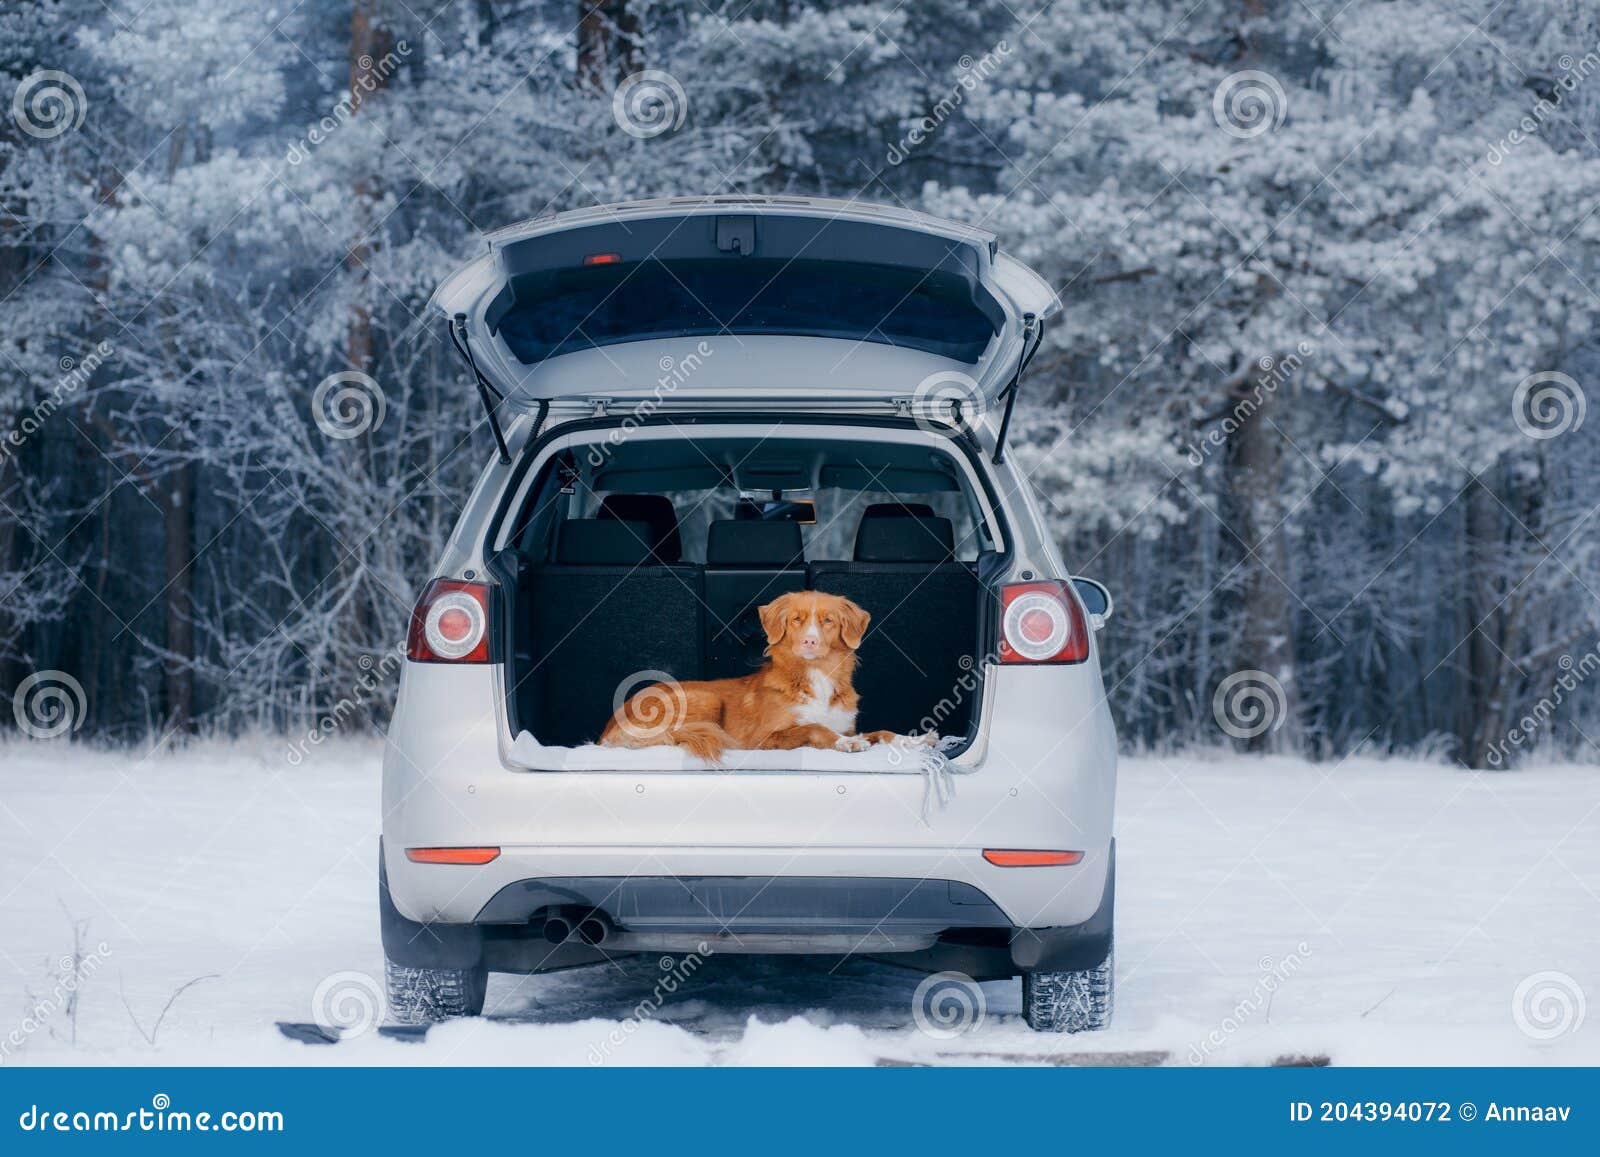 can you leave a dog in the car in winter